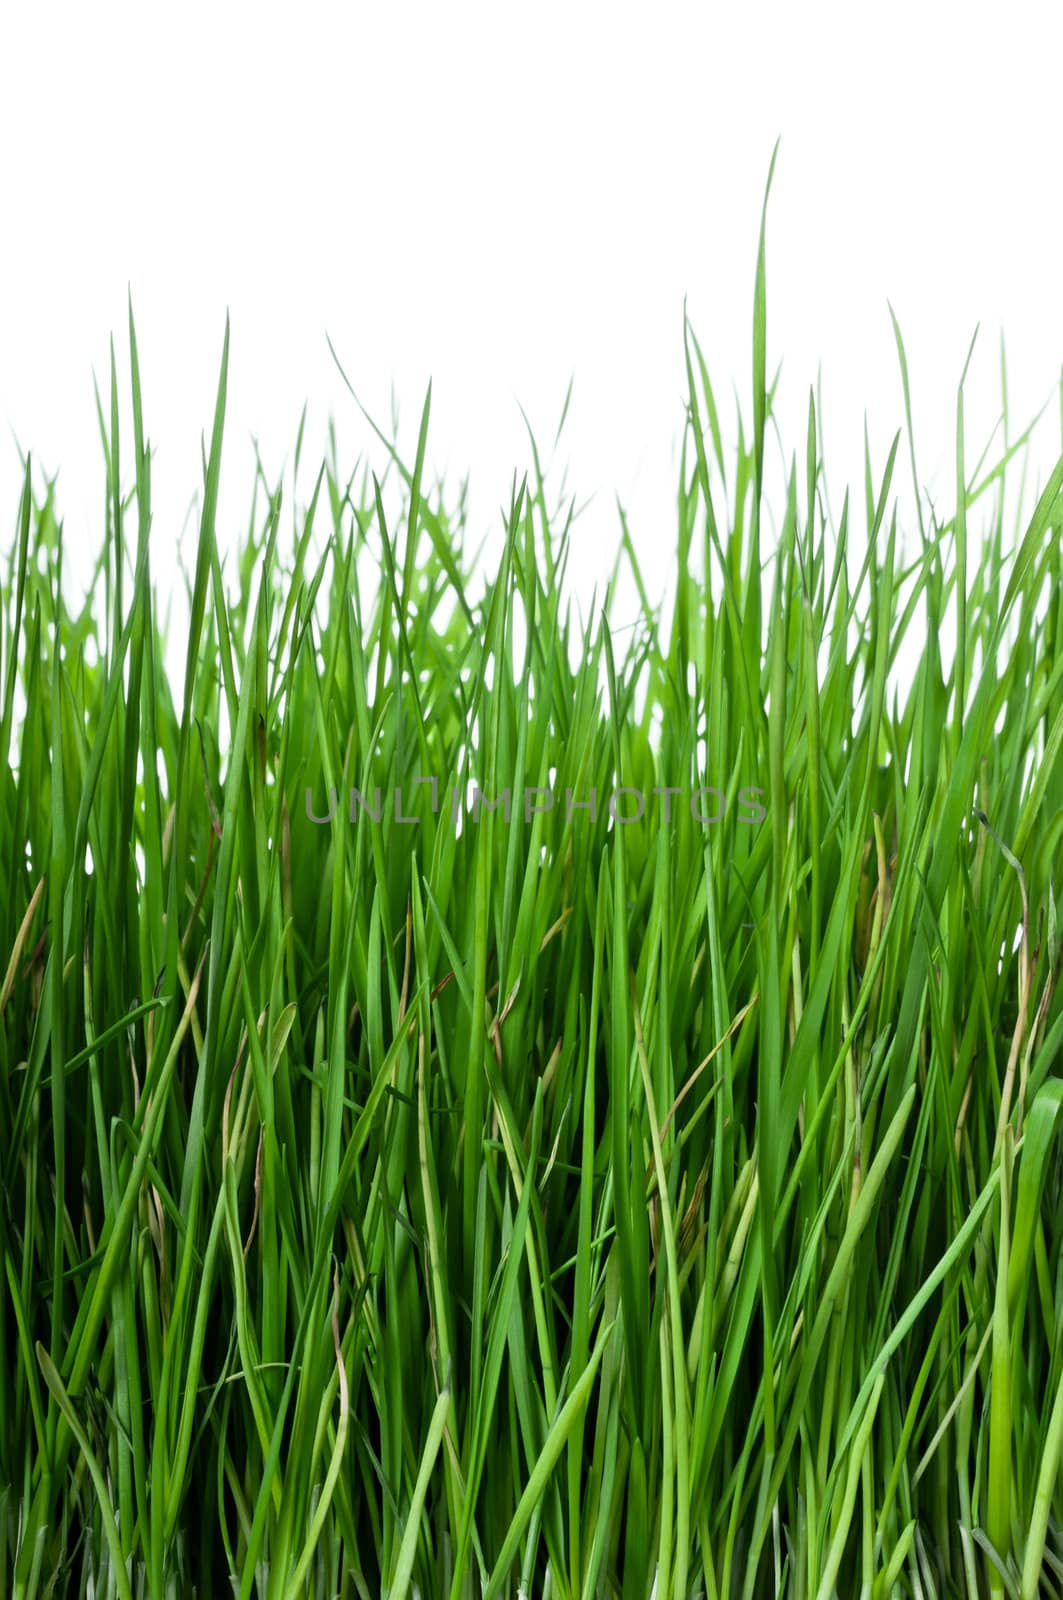 Green and lush grass on white background, vertical composition